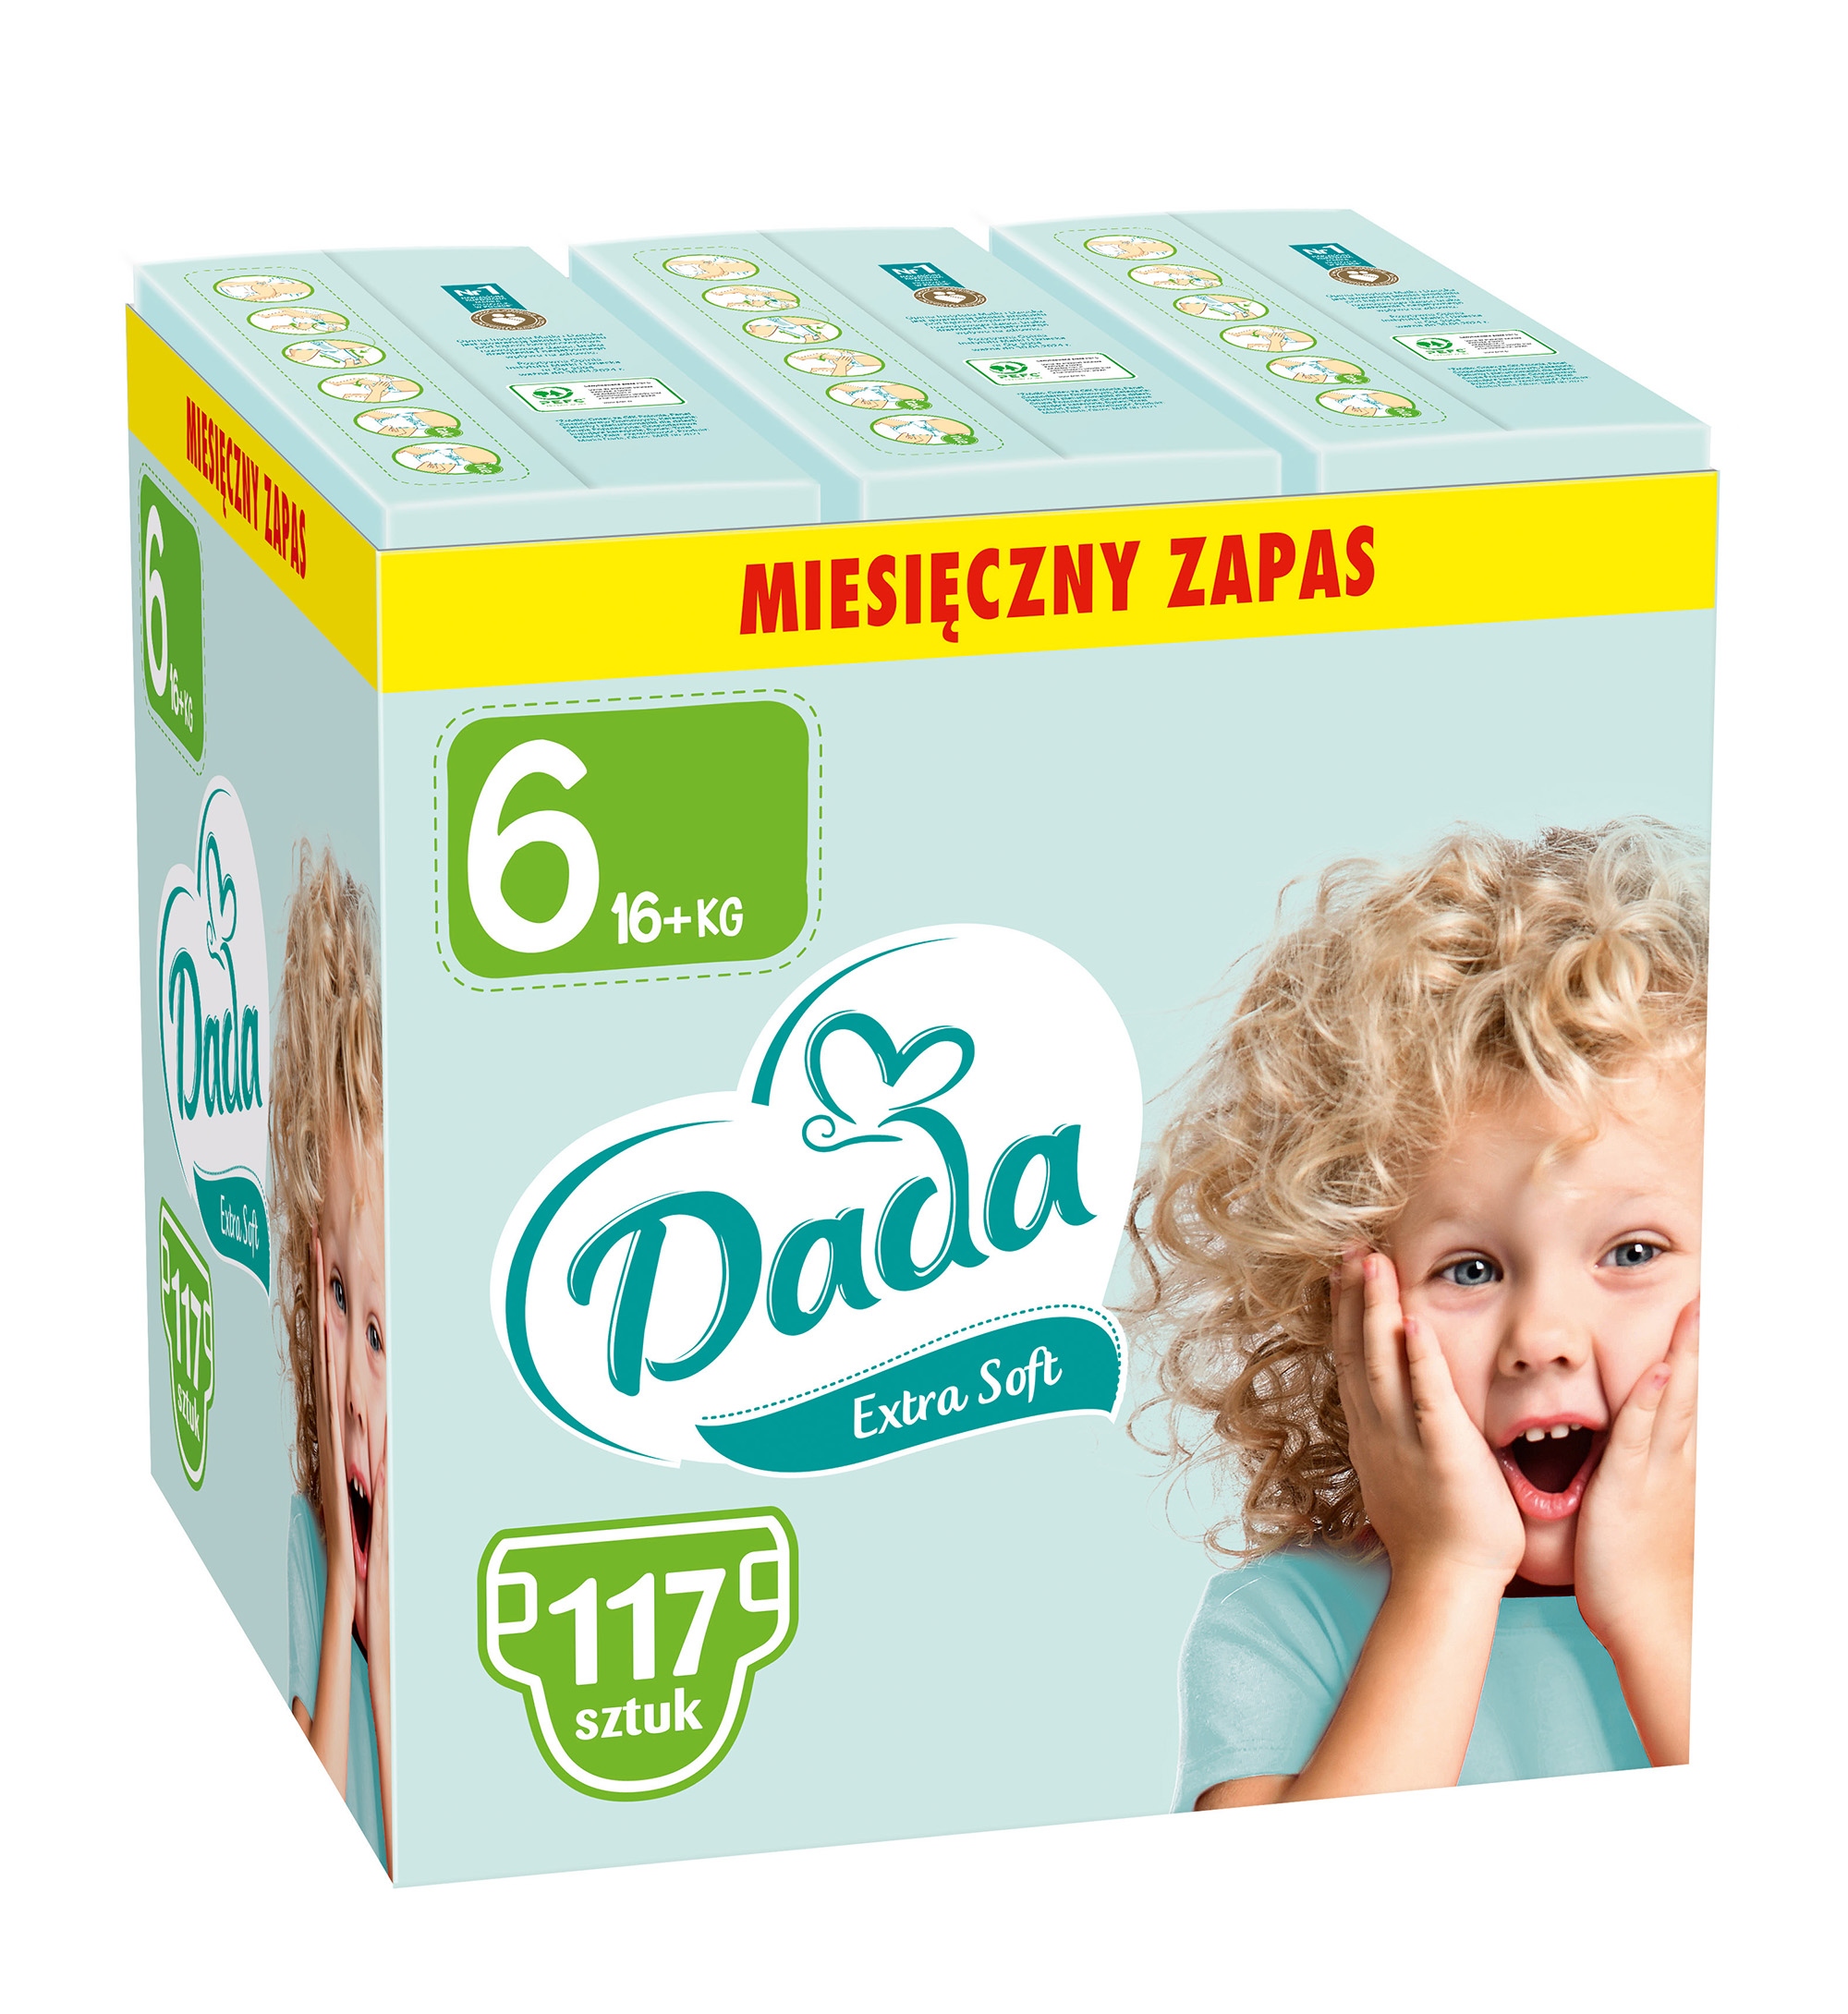 pampers biodegradable